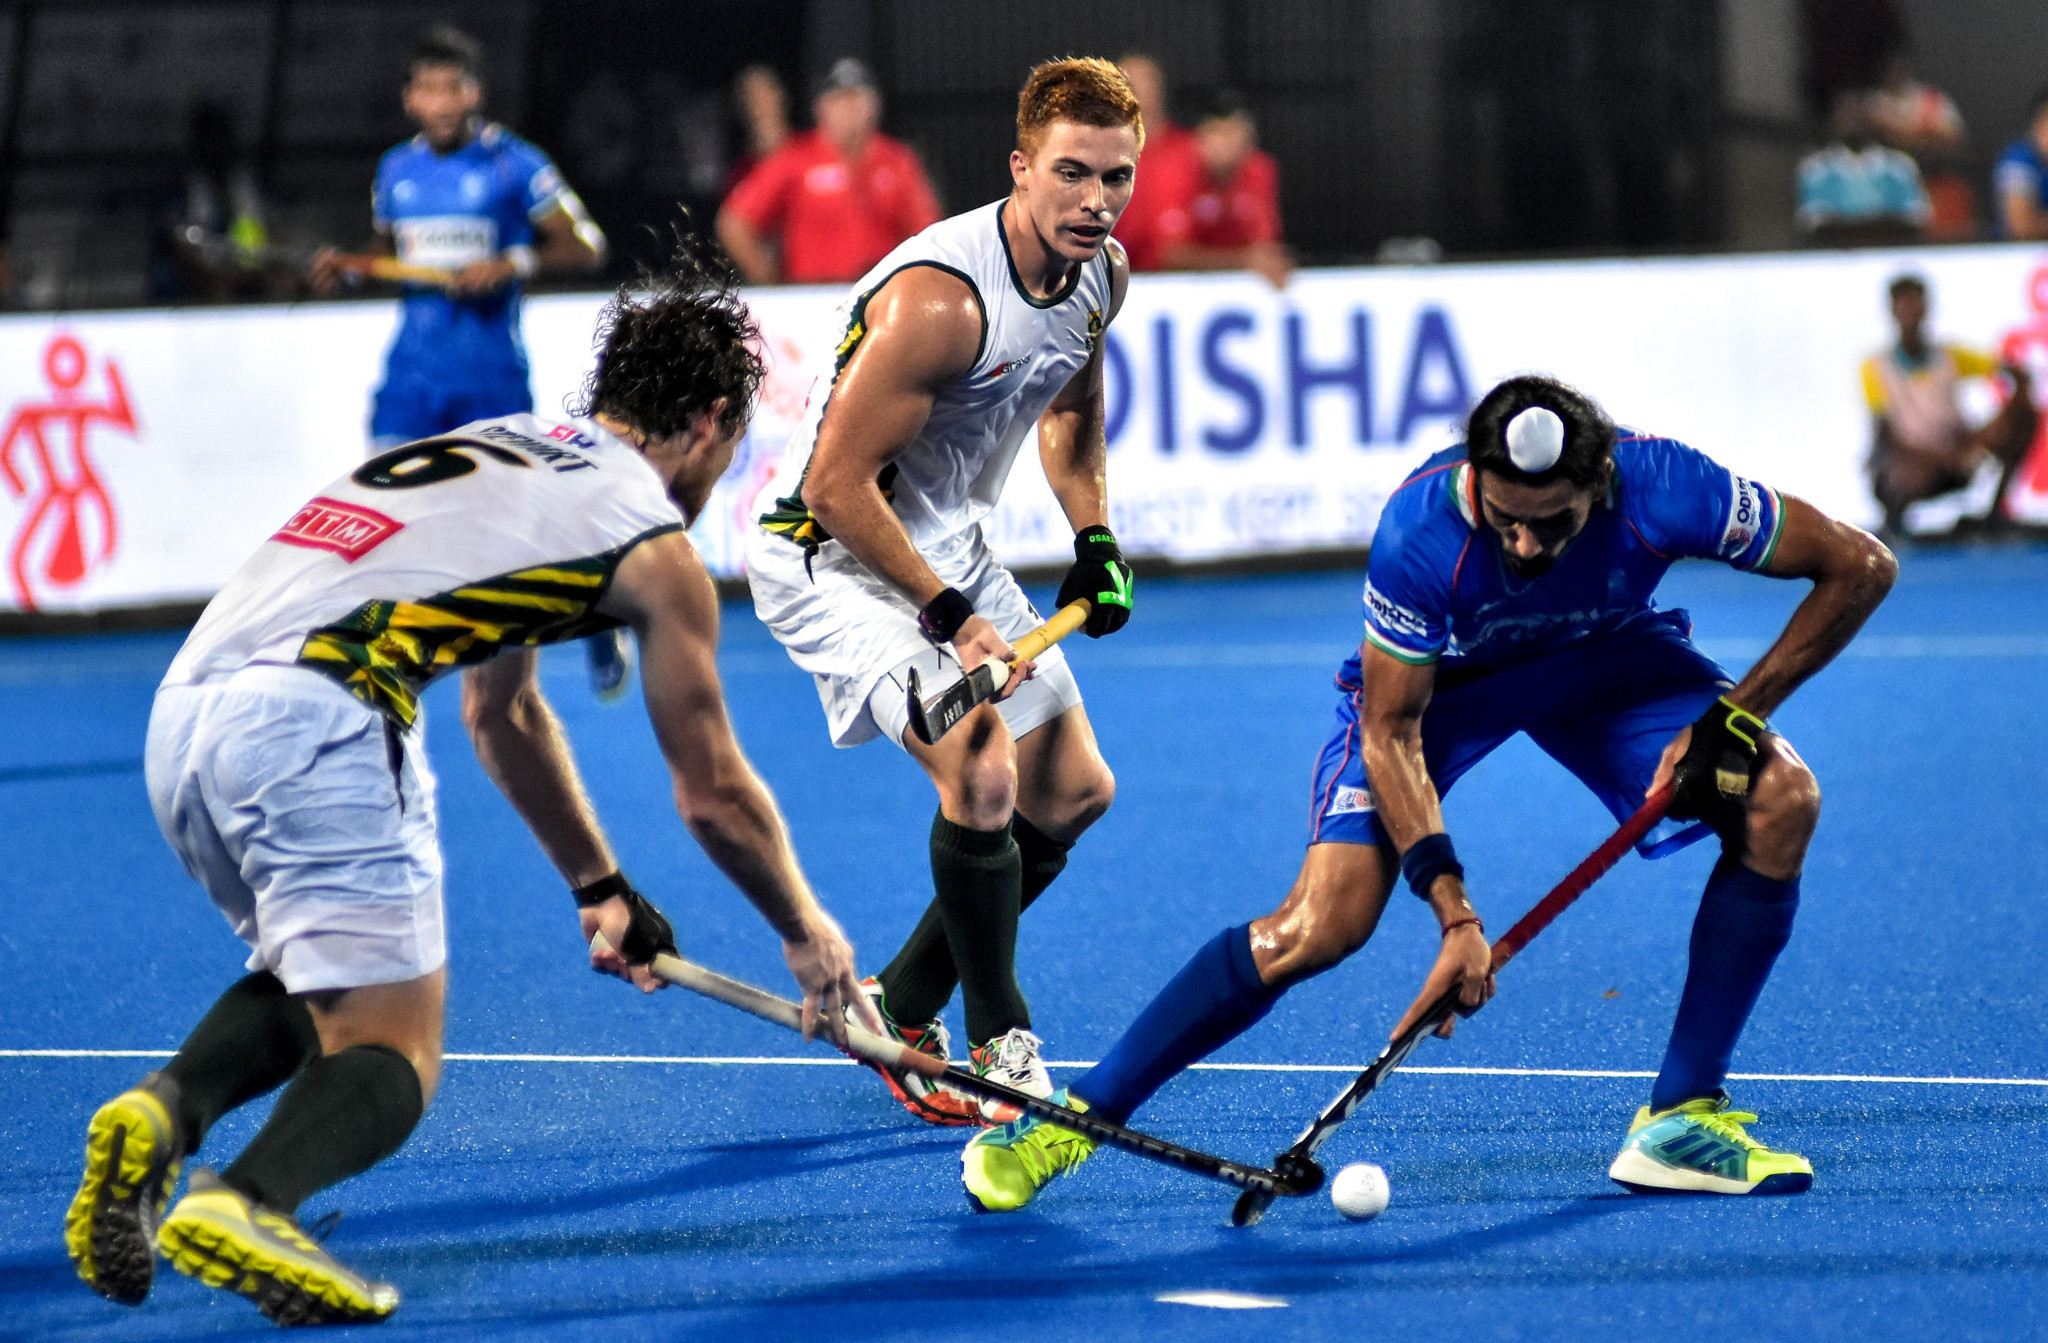 SAHA urge SASCOC to "do the right thing" by sending hockey teams to Tokyo 2020